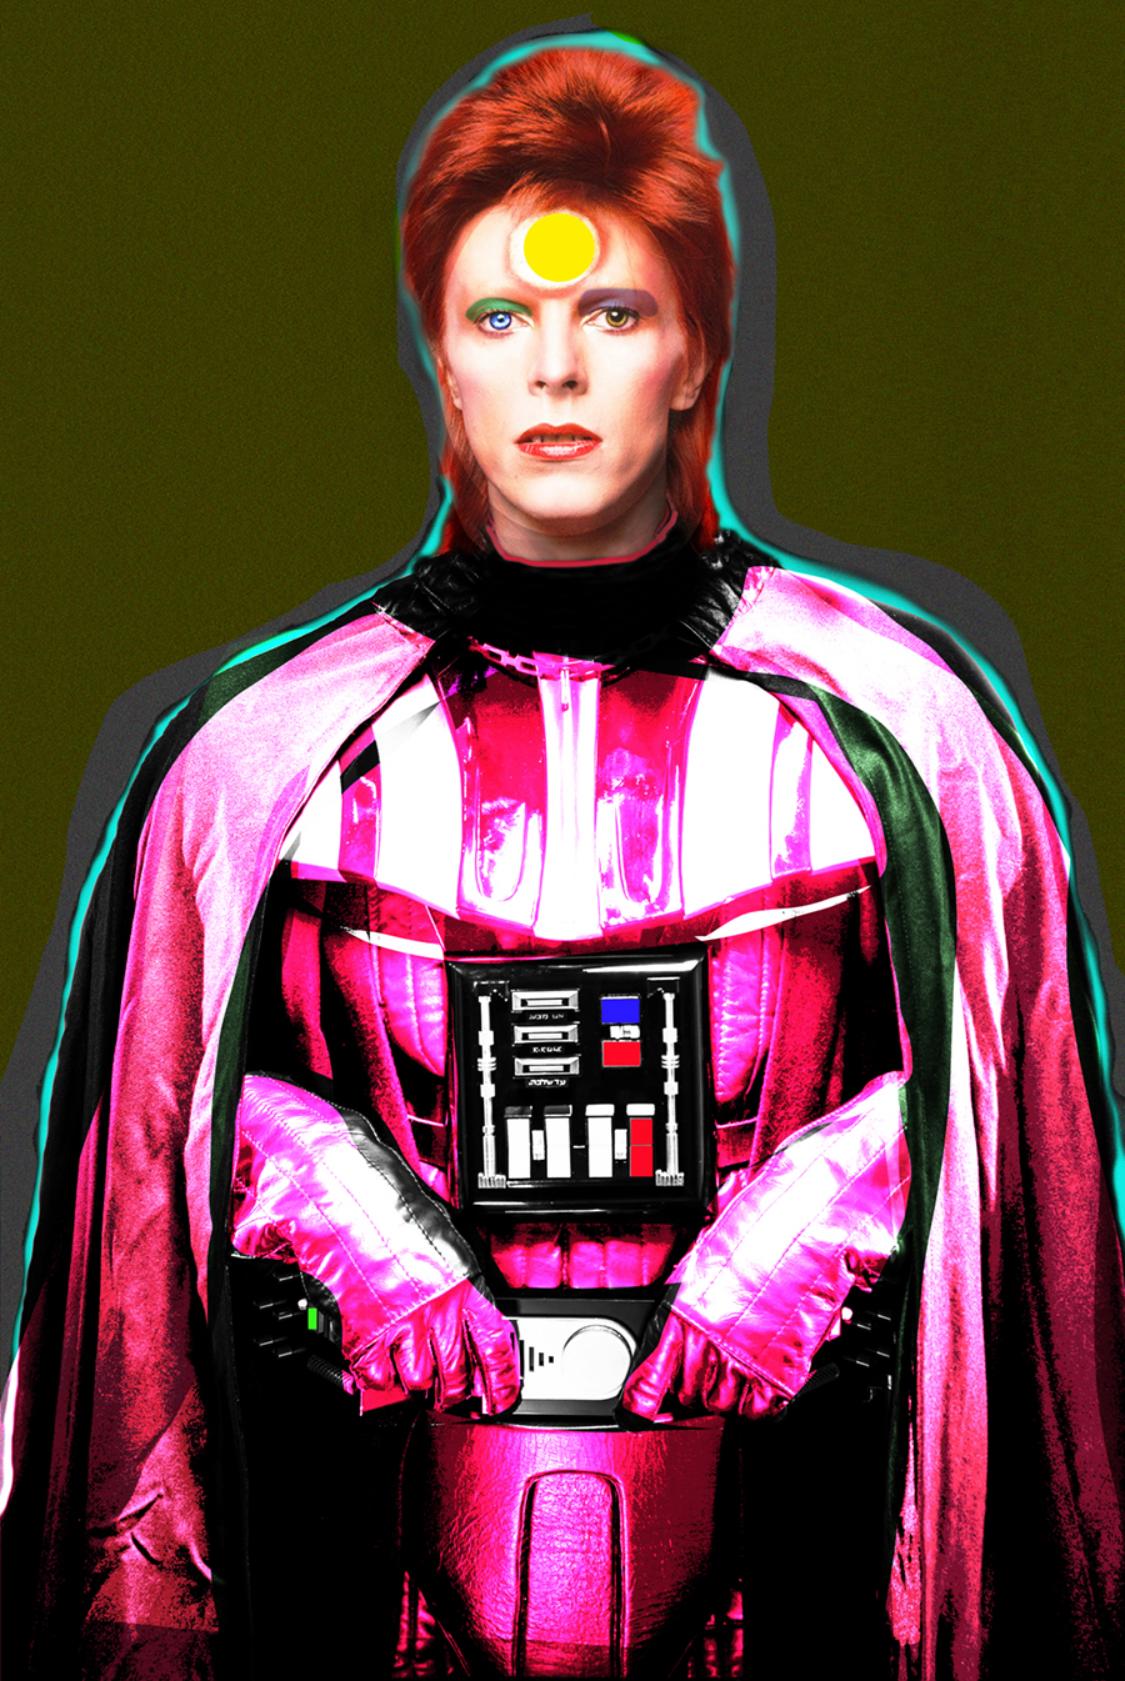 David Bowie as Darth Ziggy Pink  - Signed Limited Edition - Art by BATIK